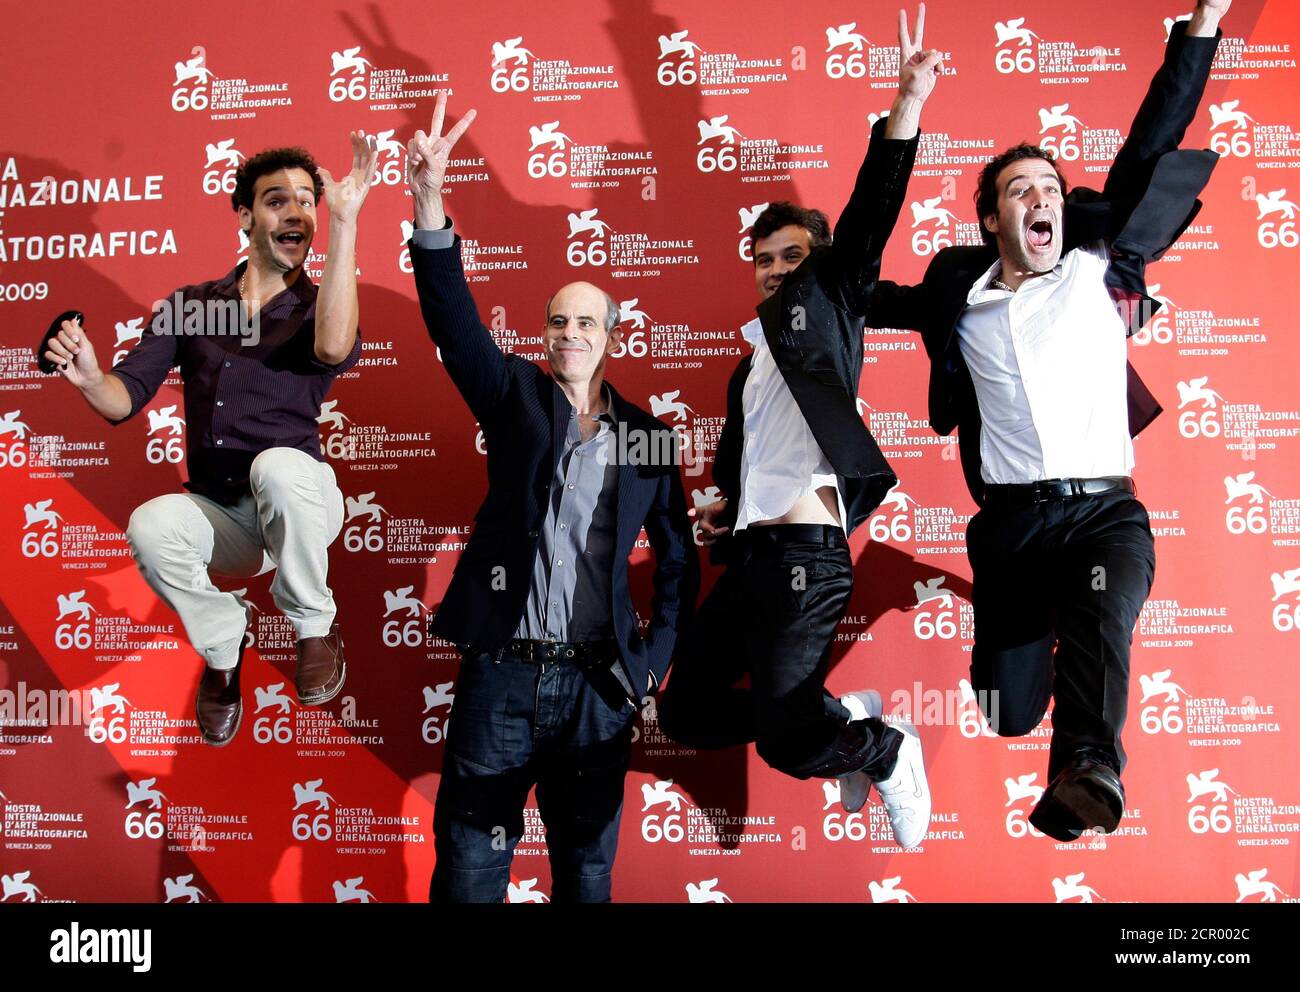 Film director Samuel Maoz (2nd L) and actors Yoav Donat (L), Michael Moshonov and Zohar Strauss (R) attend the 'Lebanon' photocall during the 66th Venice Film Festival September 8, 2009.  REUTERS/Tony Gentile (ITALY ENTERTAINMENT) Stock Photo